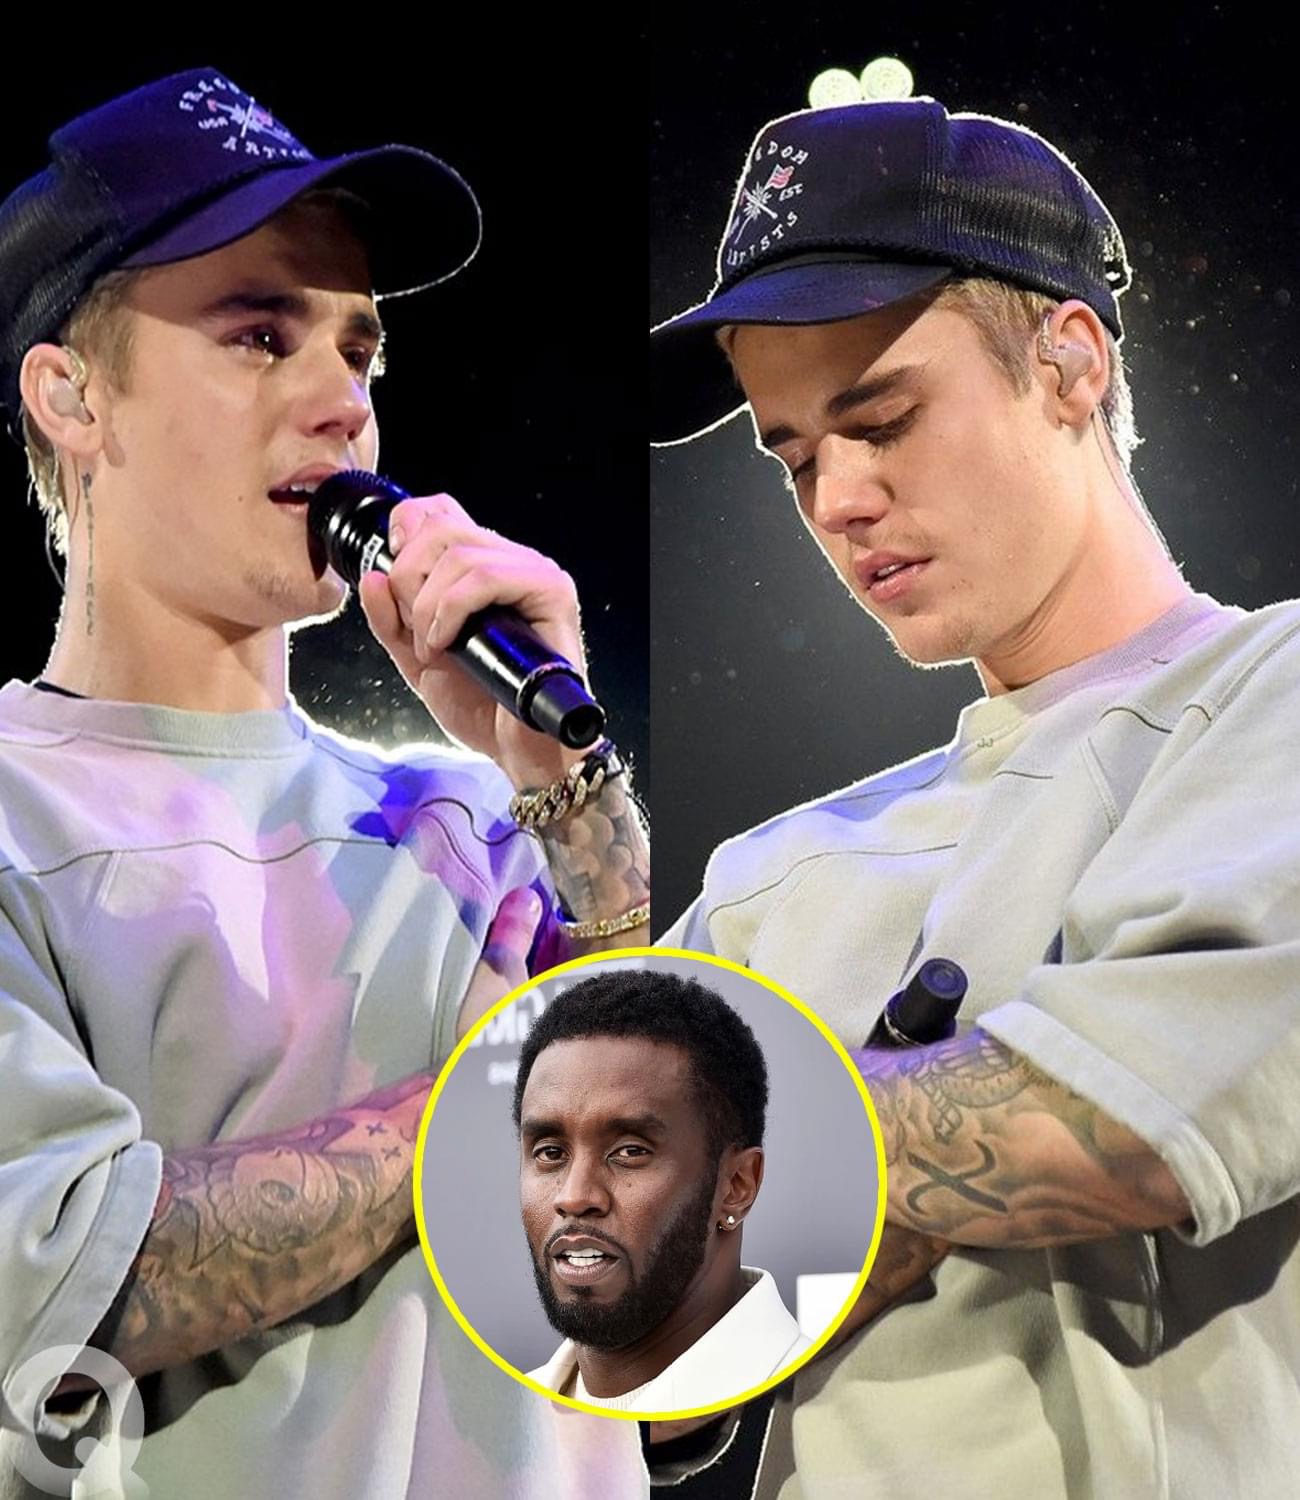 I WAS JUST A KID BACK THEN! Justin Bieber In Tears & Reveals Painful History In The Hands Of P Diddy